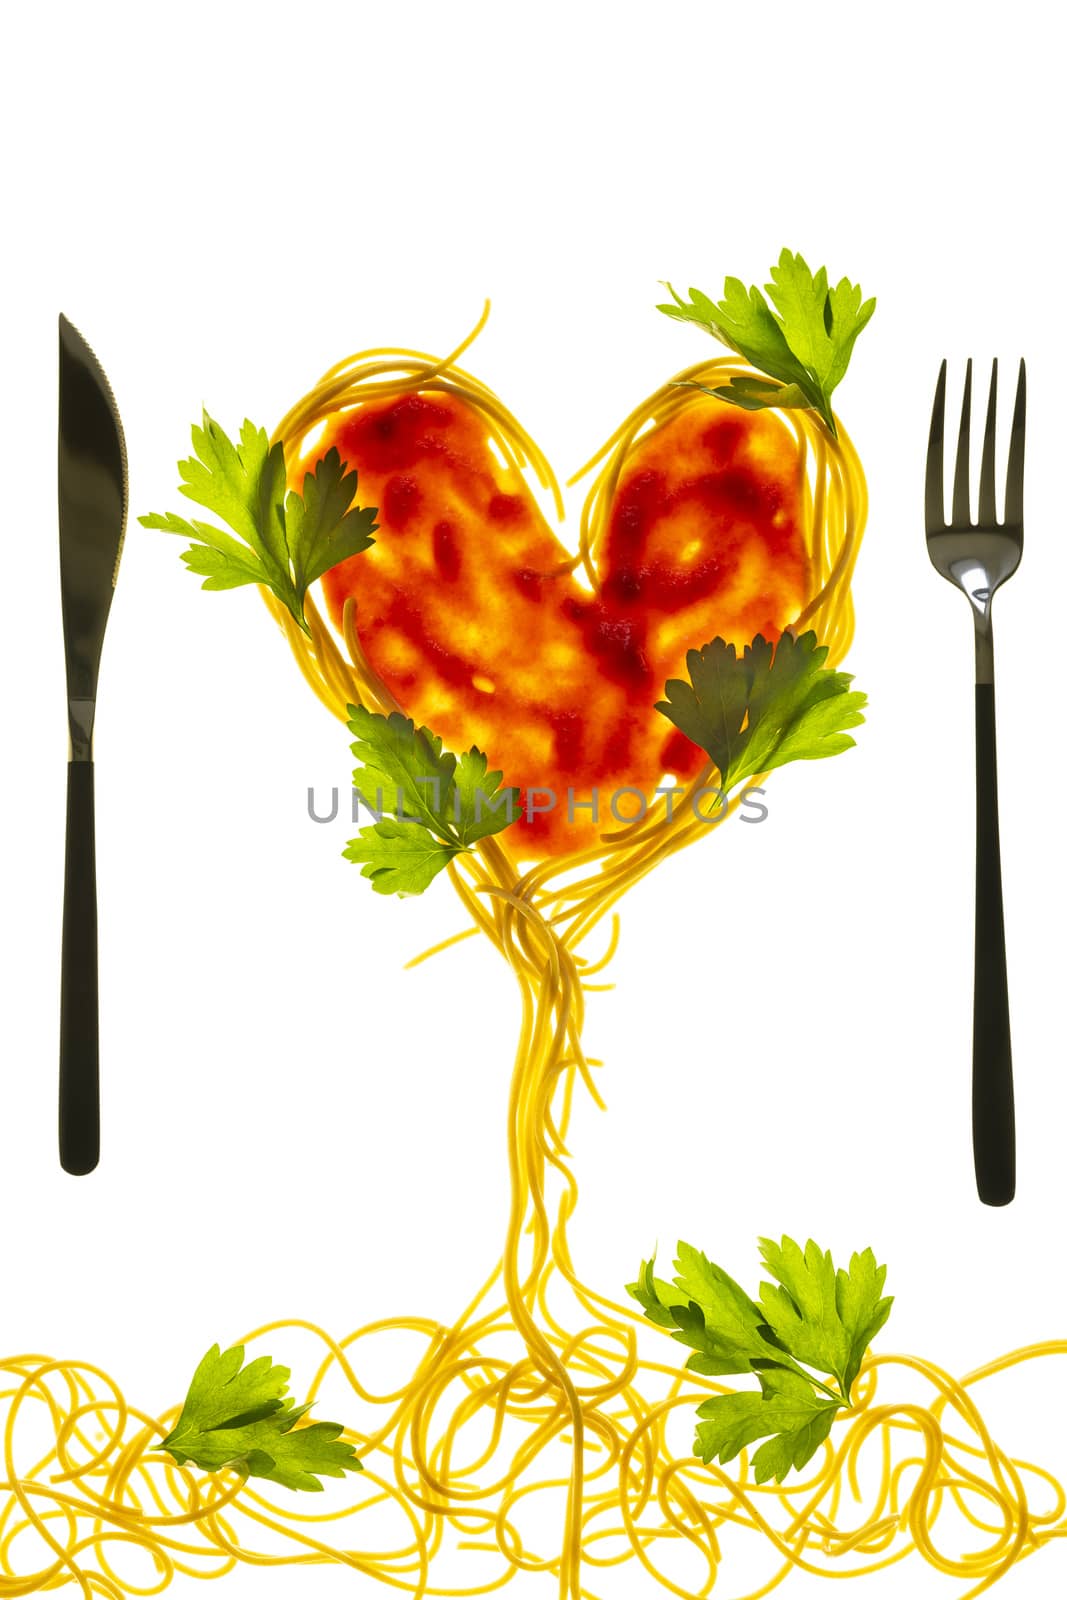 Swirls of cooked spaghetti with fork. Spaghetti heart shape. by sashokddt